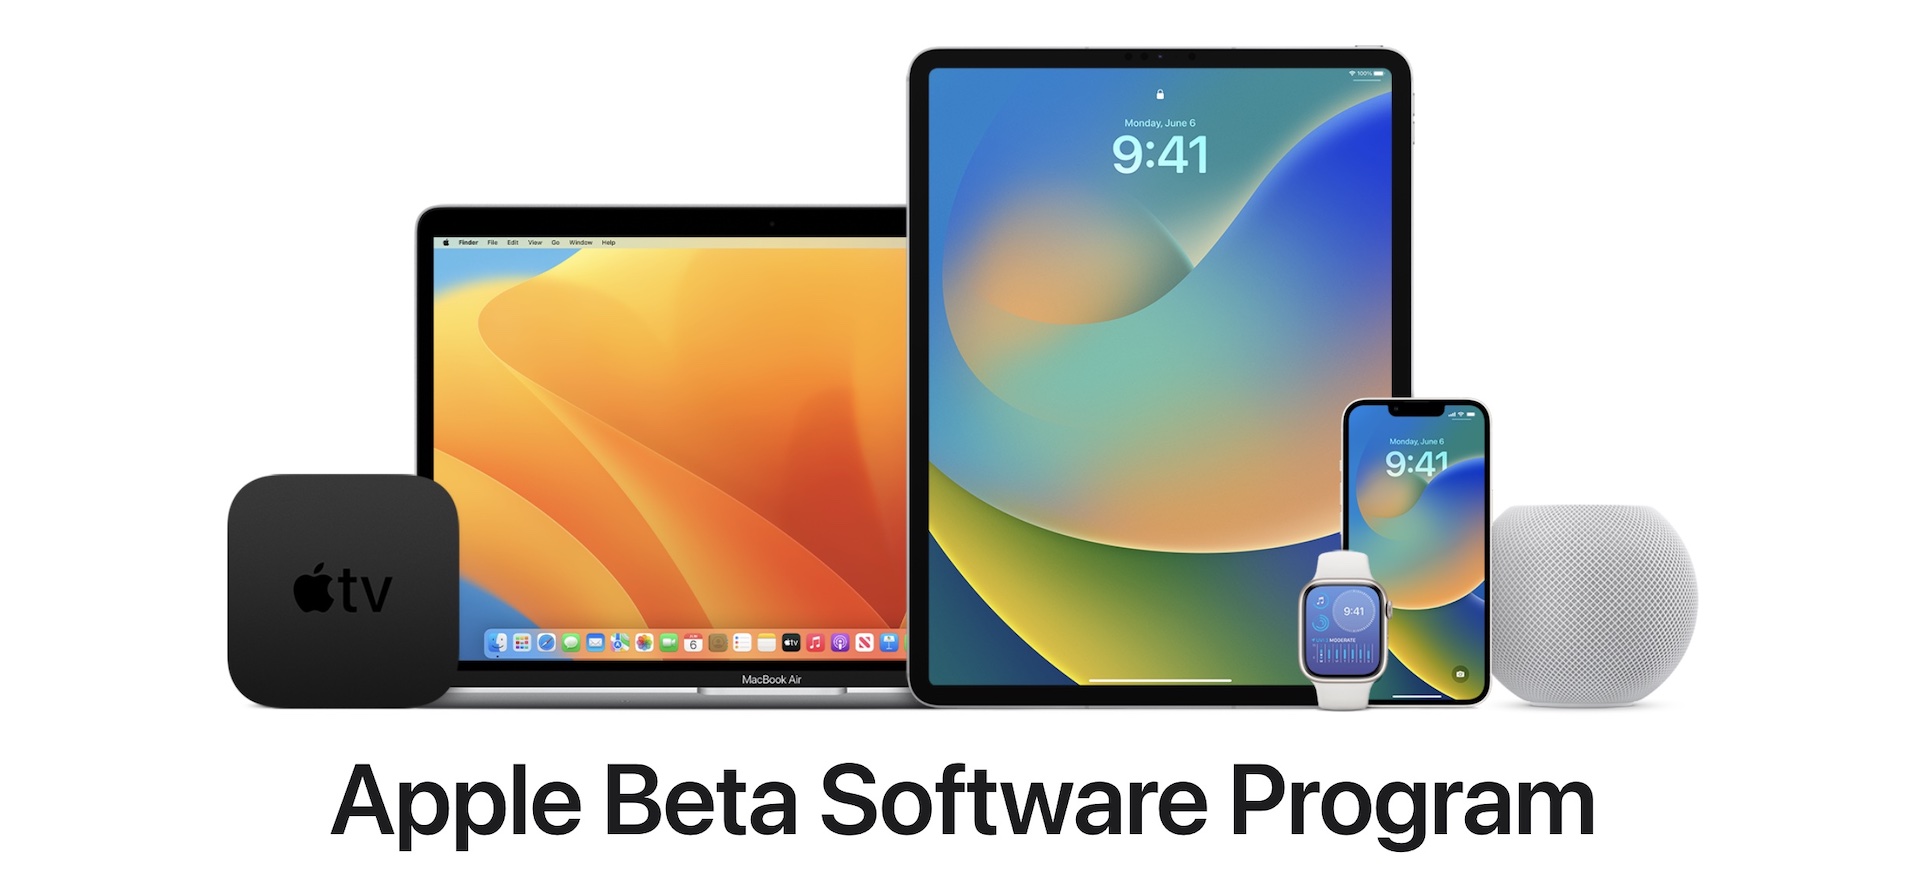 Apple's iOS 16 and iPadOS 16 public betas are now available to everyone. Here's how to install them